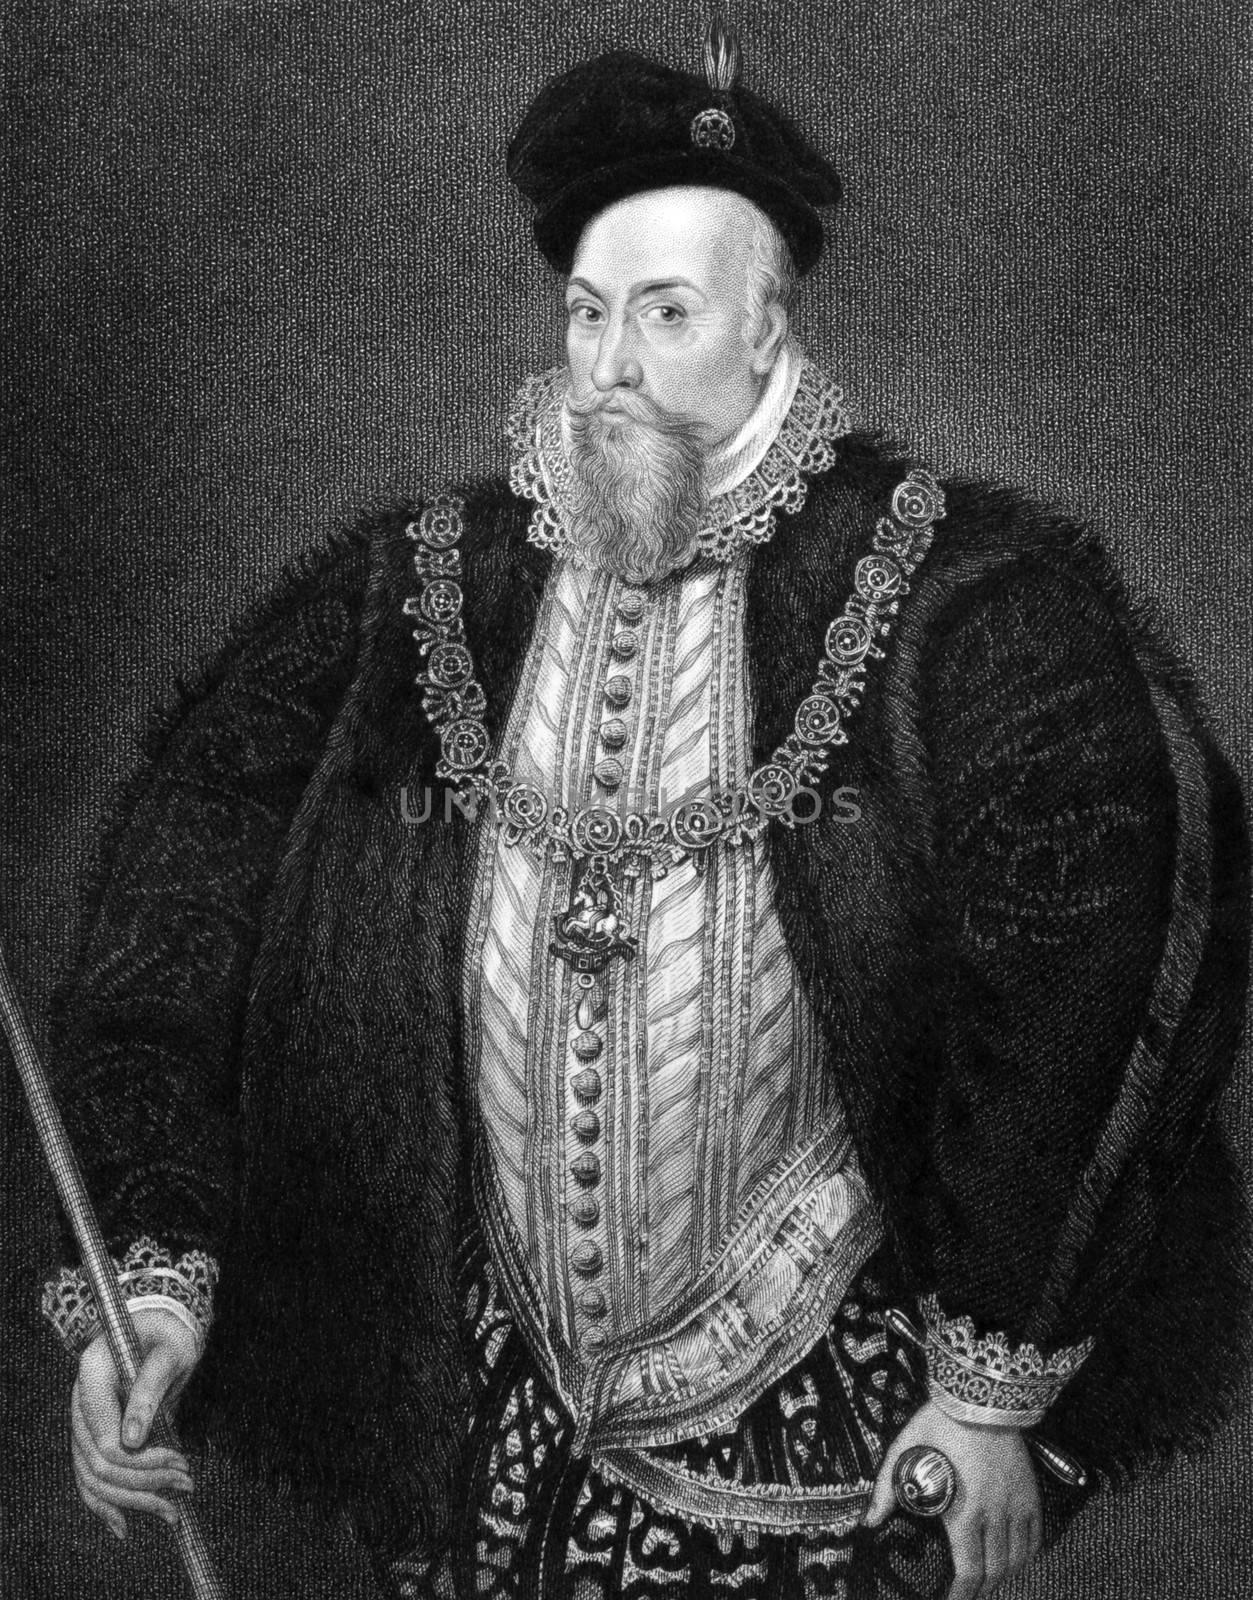 Robert Dudley, 1st Earl of Leicester by Georgios